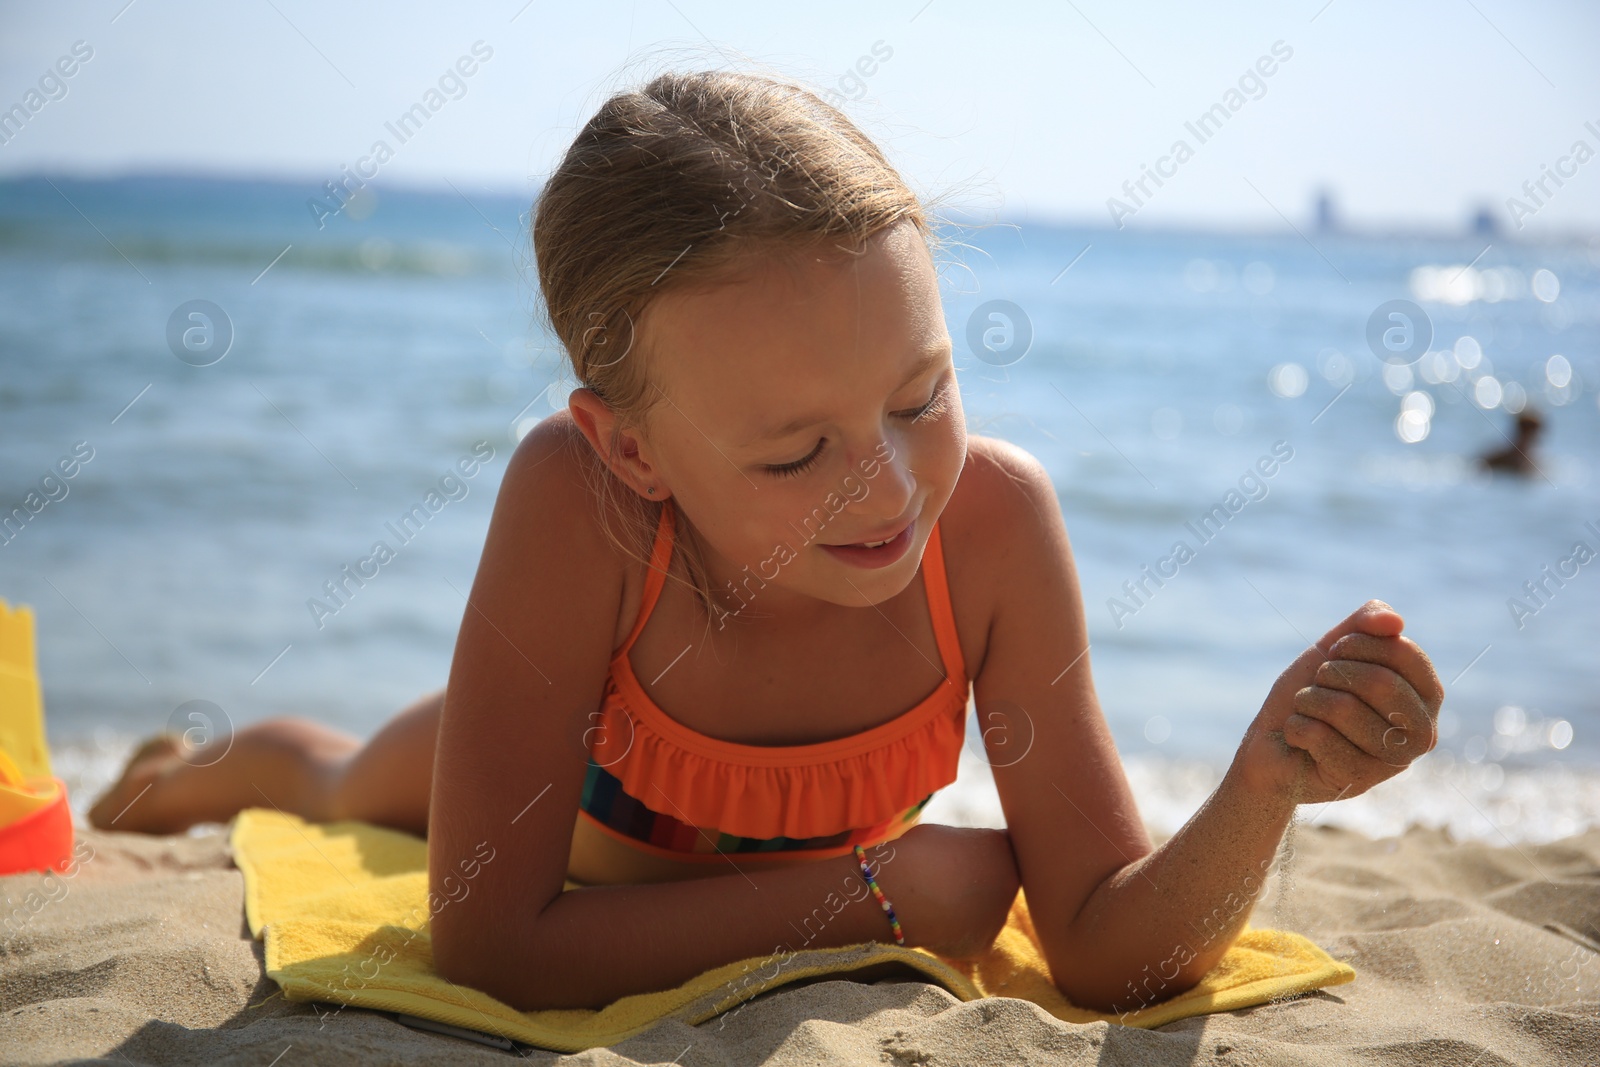 Photo of Little girl playing with sand on beach near sea